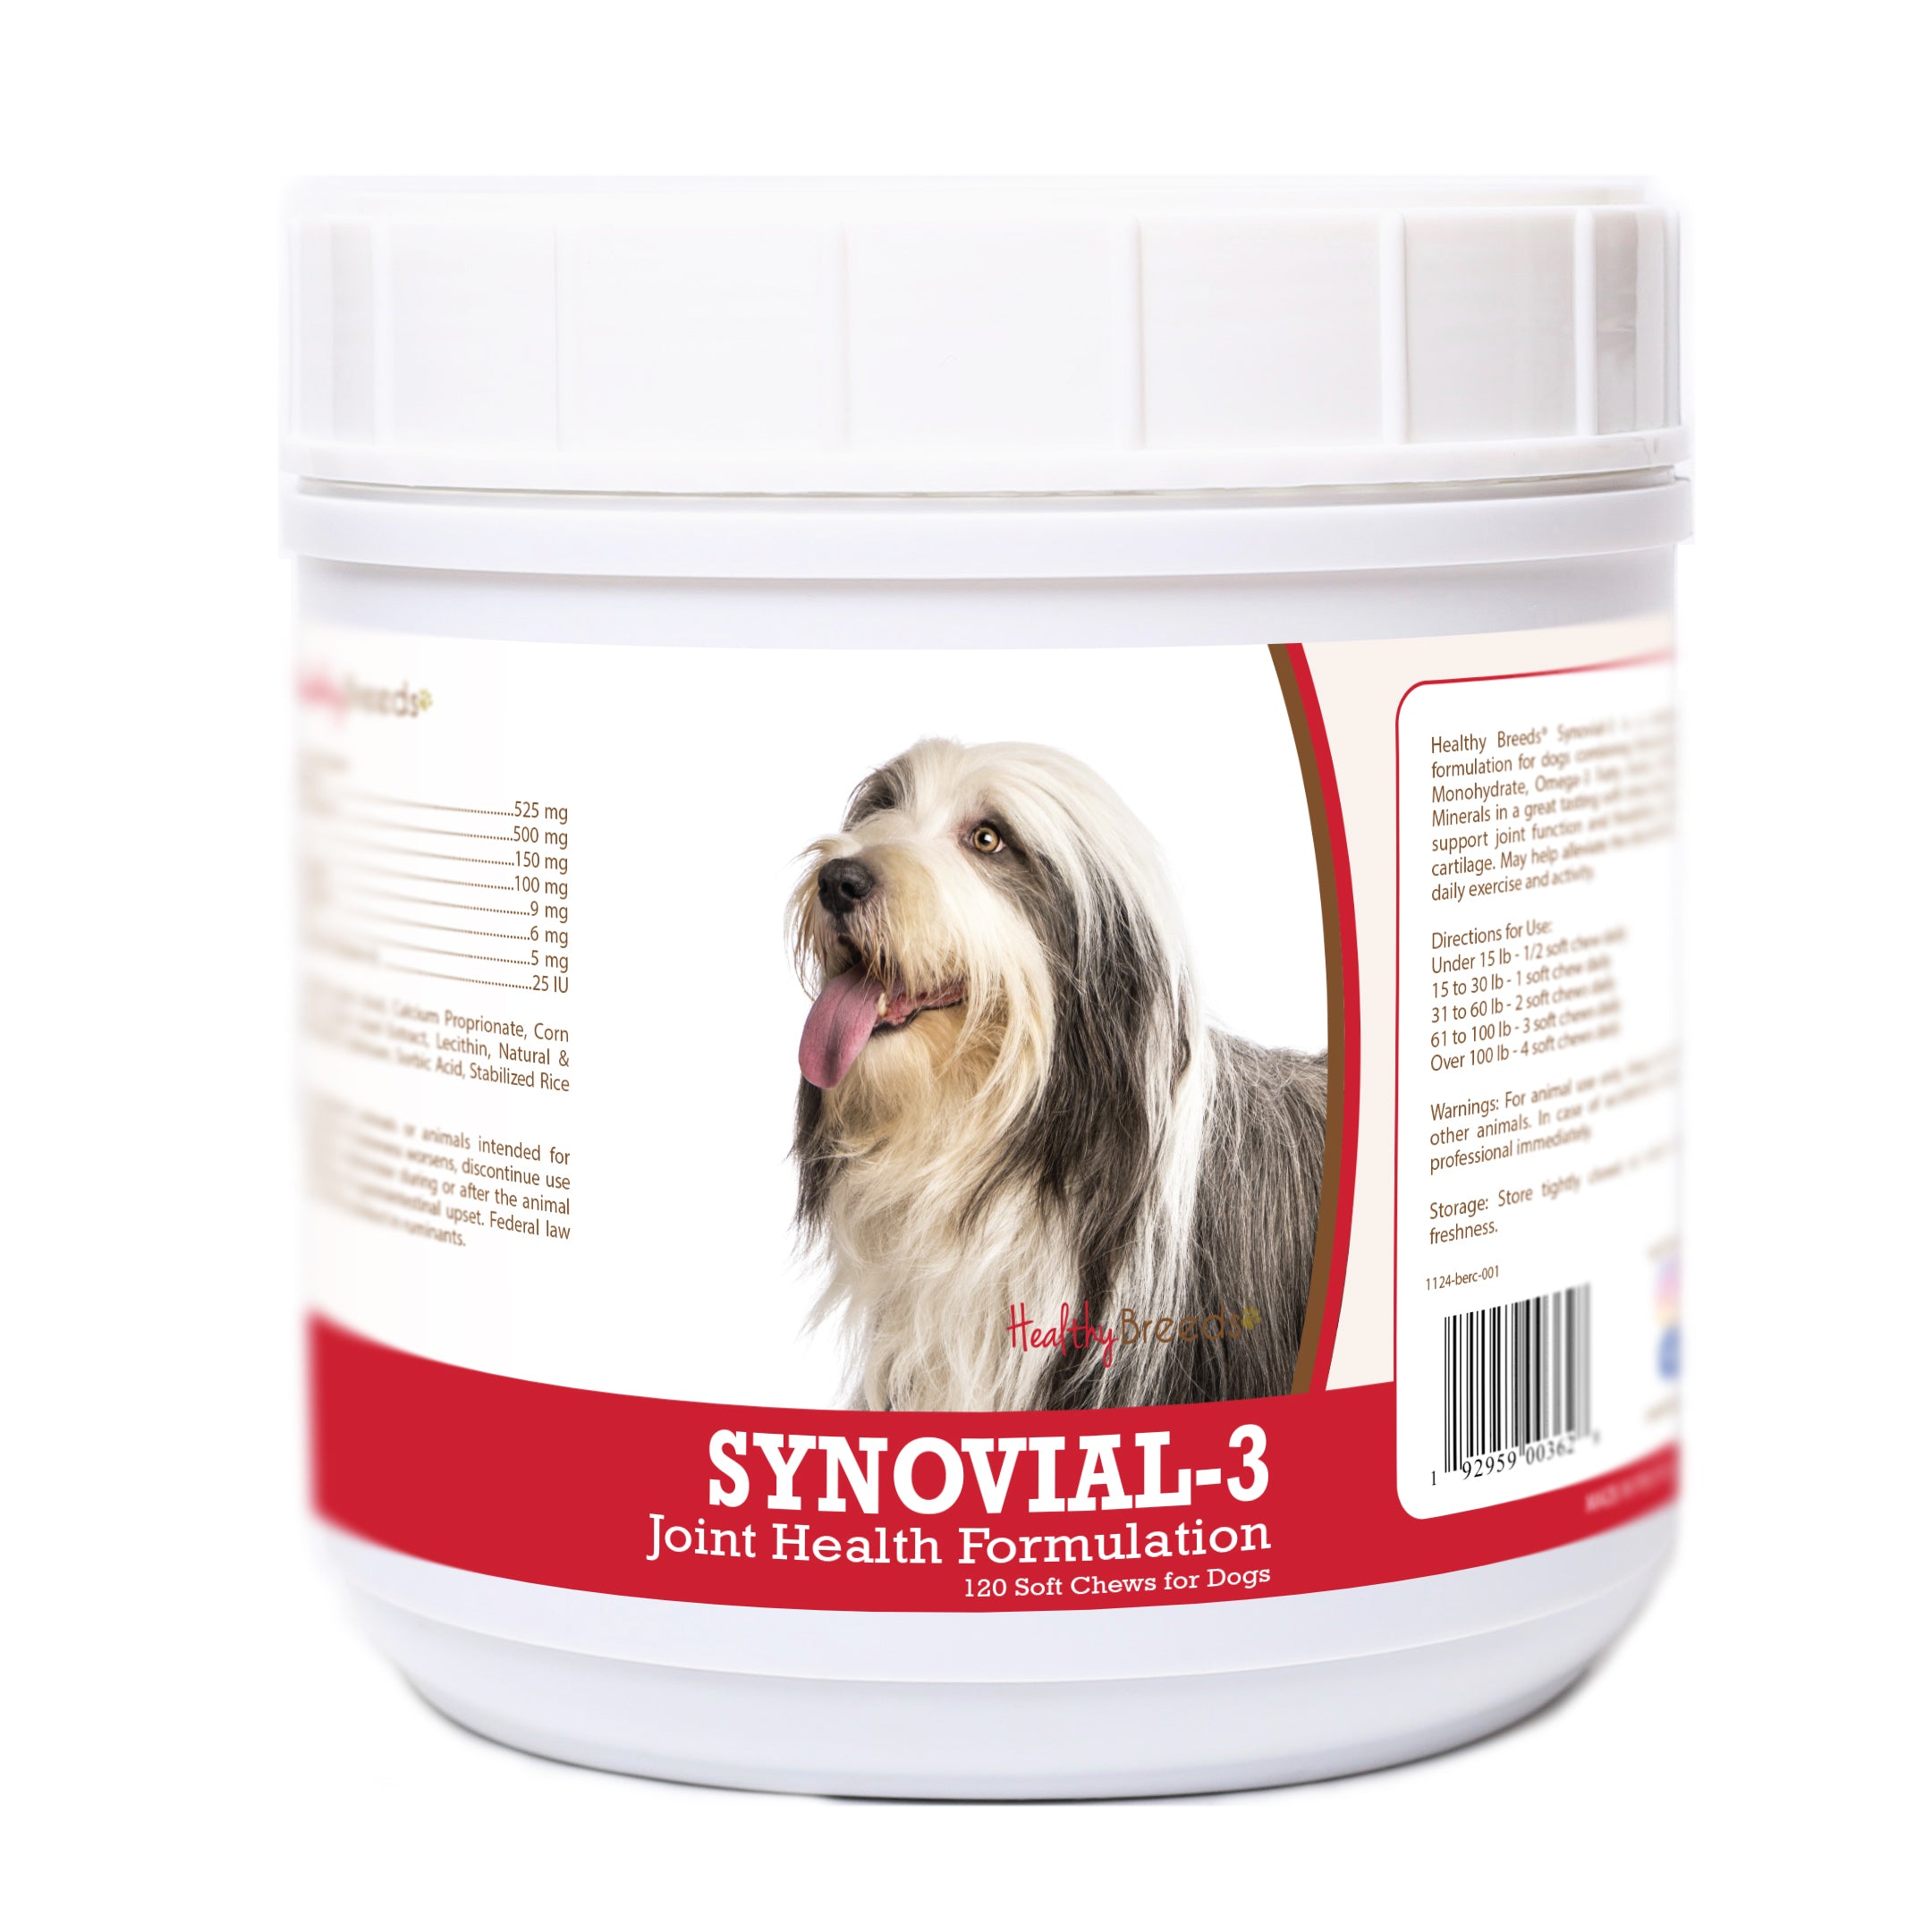 Bearded Collie Synovial-3 Joint Health Formulation Soft Chews 120 Count